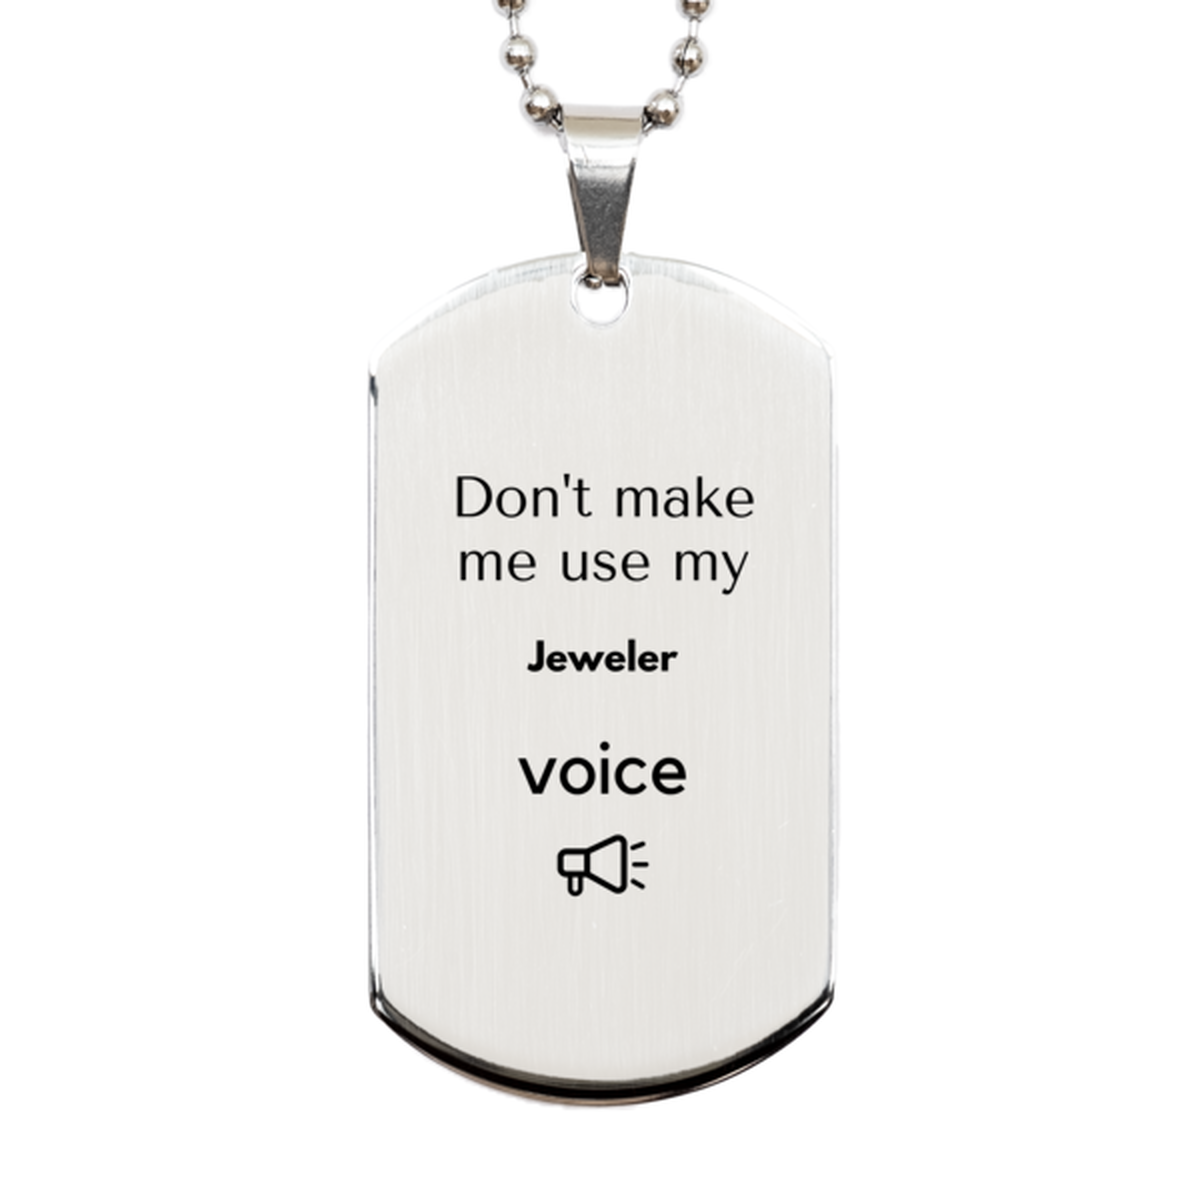 Don't make me use my Jeweler voice, Sarcasm Jeweler Gifts, Christmas Jeweler Silver Dog Tag Birthday Unique Gifts For Jeweler Coworkers, Men, Women, Colleague, Friends